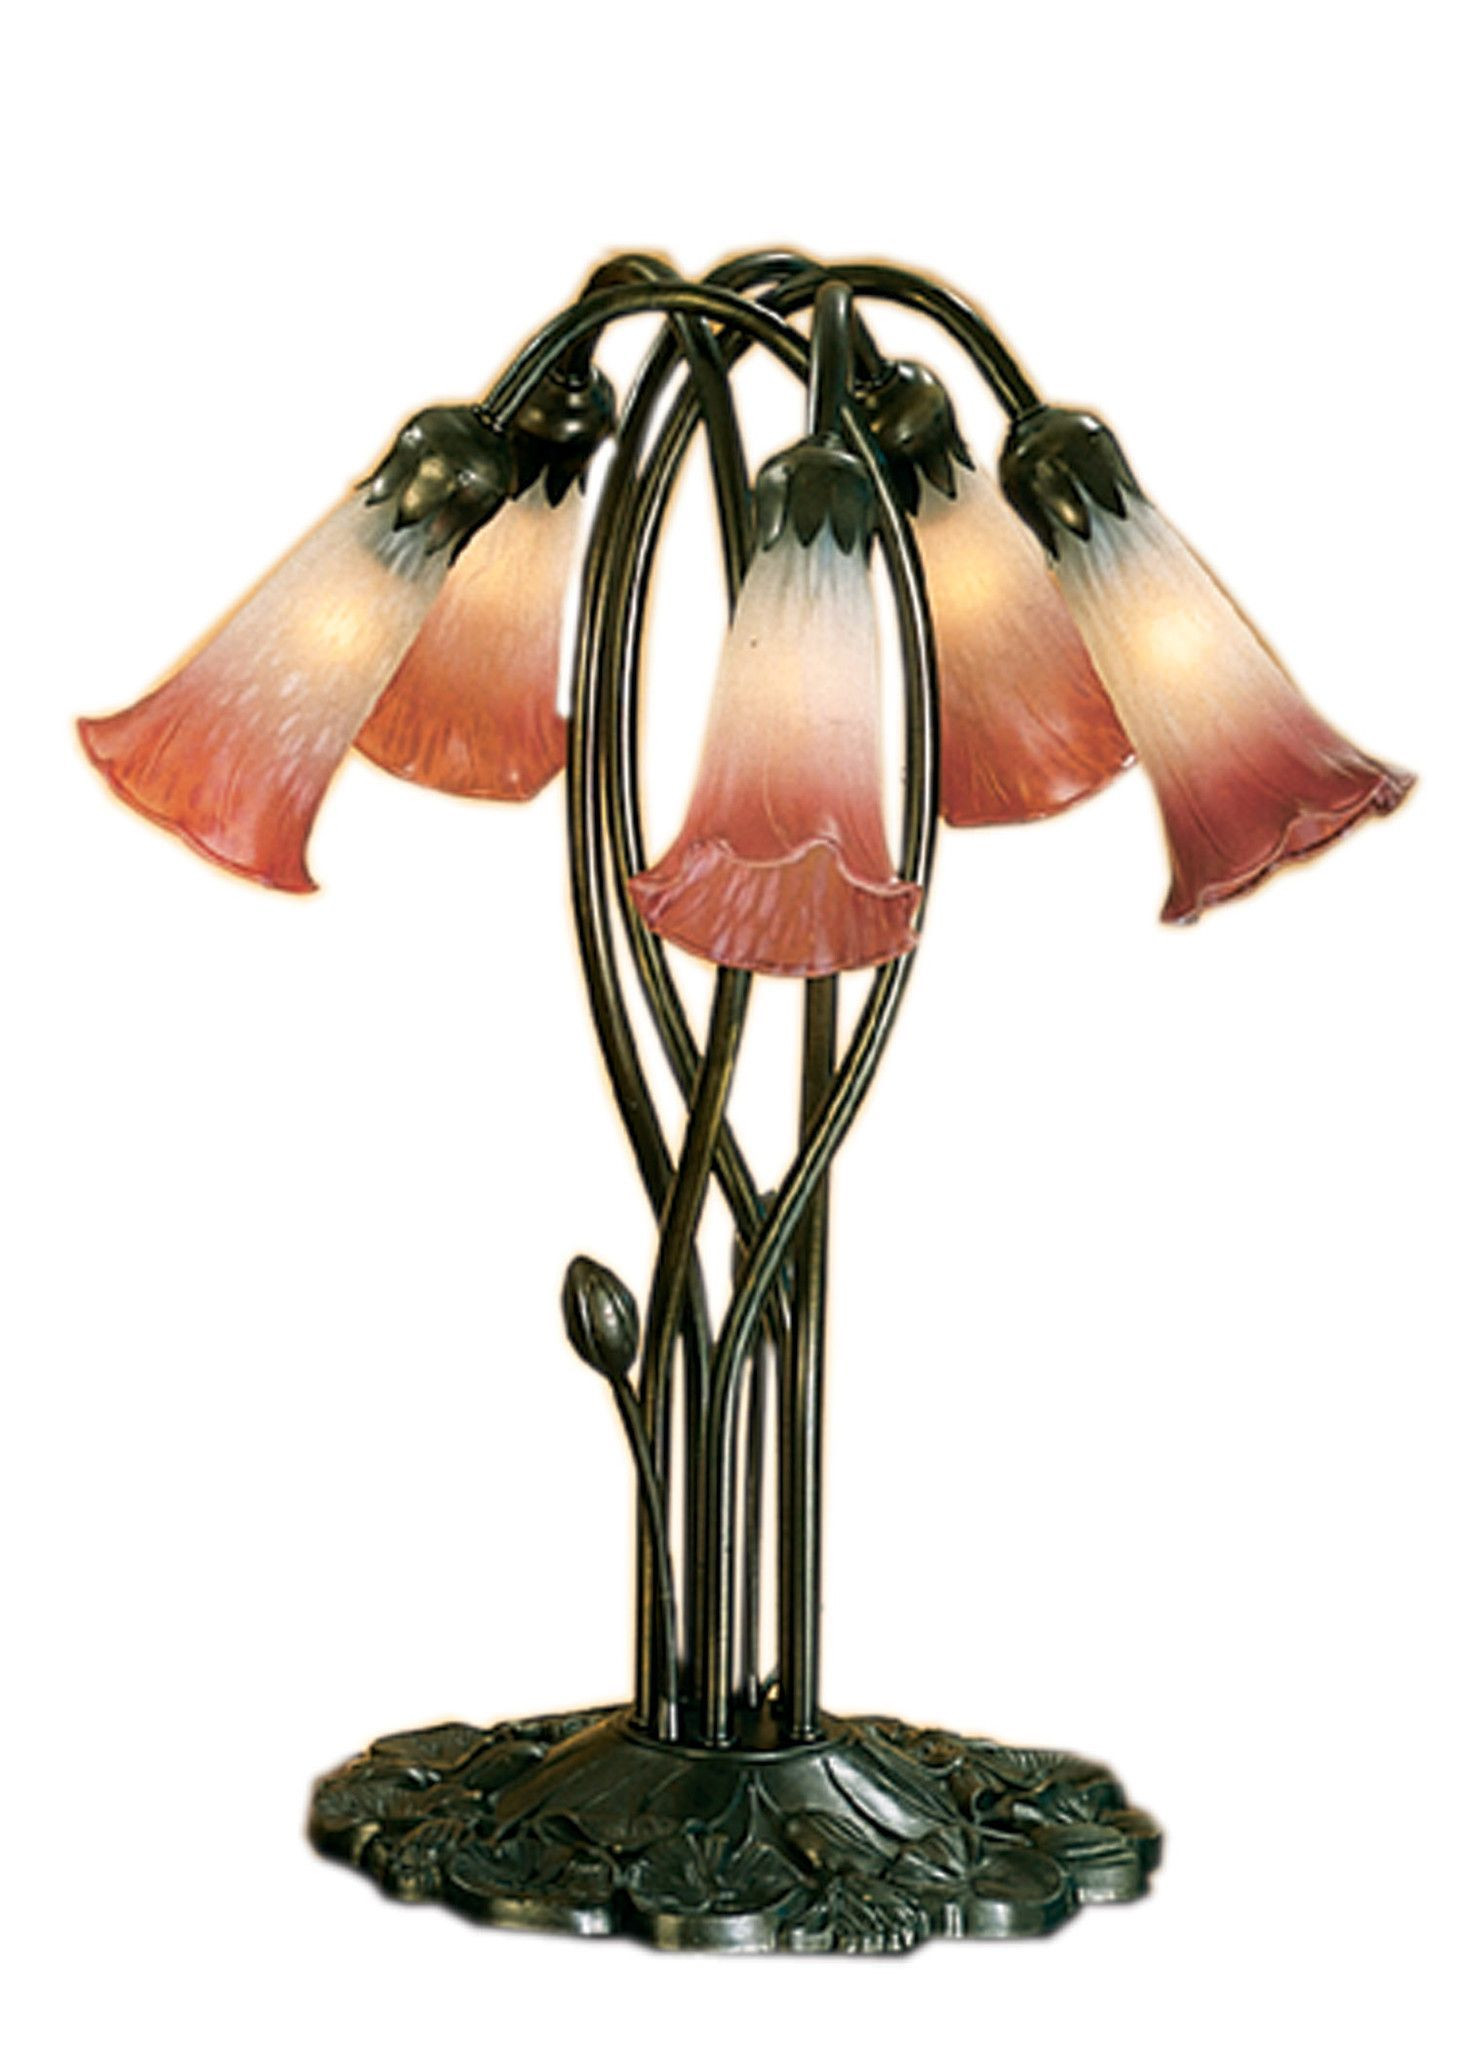 20 Spectacular Tiffany Tulip Vase 2024 free download tiffany tulip vase of meyda 16 5h pink white pond lily 5 lt accent lamp products regarding meyda 16 5h pink white pond lily 5 lt accent lamp